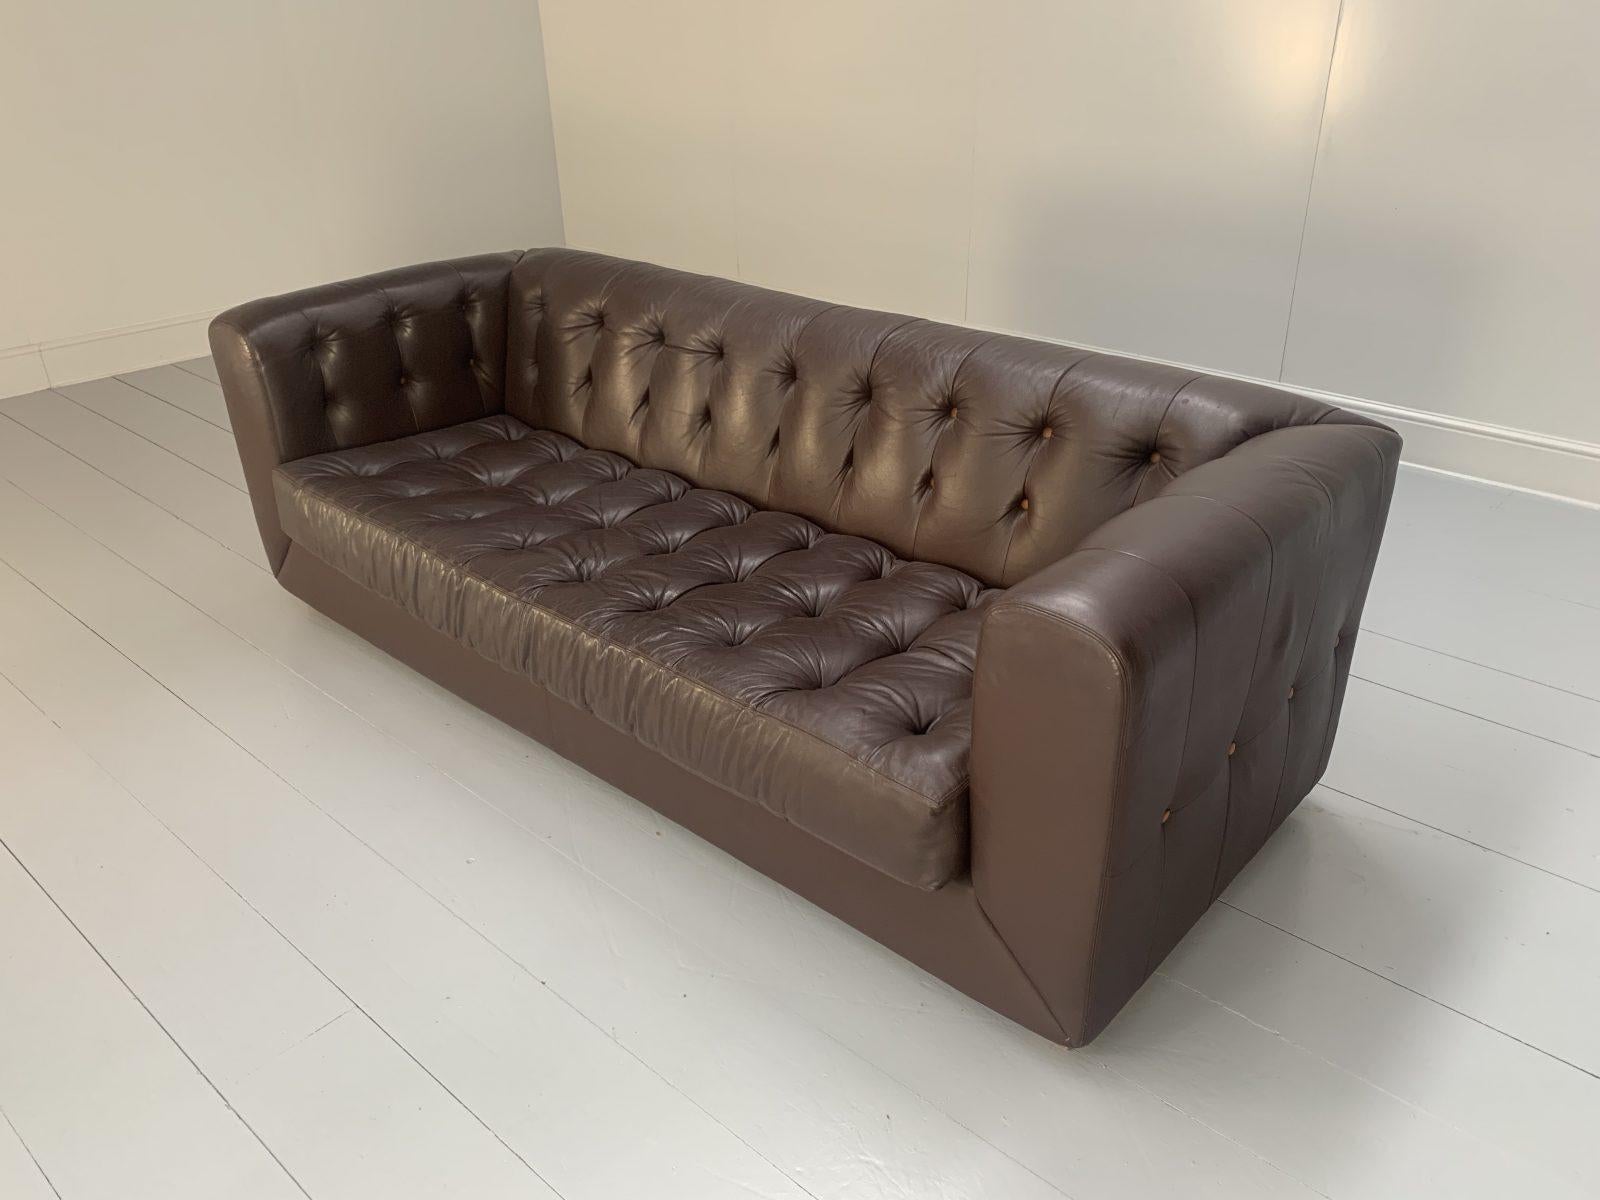 David Linley “Yoxford” Chesterfield 3-Seat Sofa in Brown Leather In Good Condition For Sale In Barrowford, GB